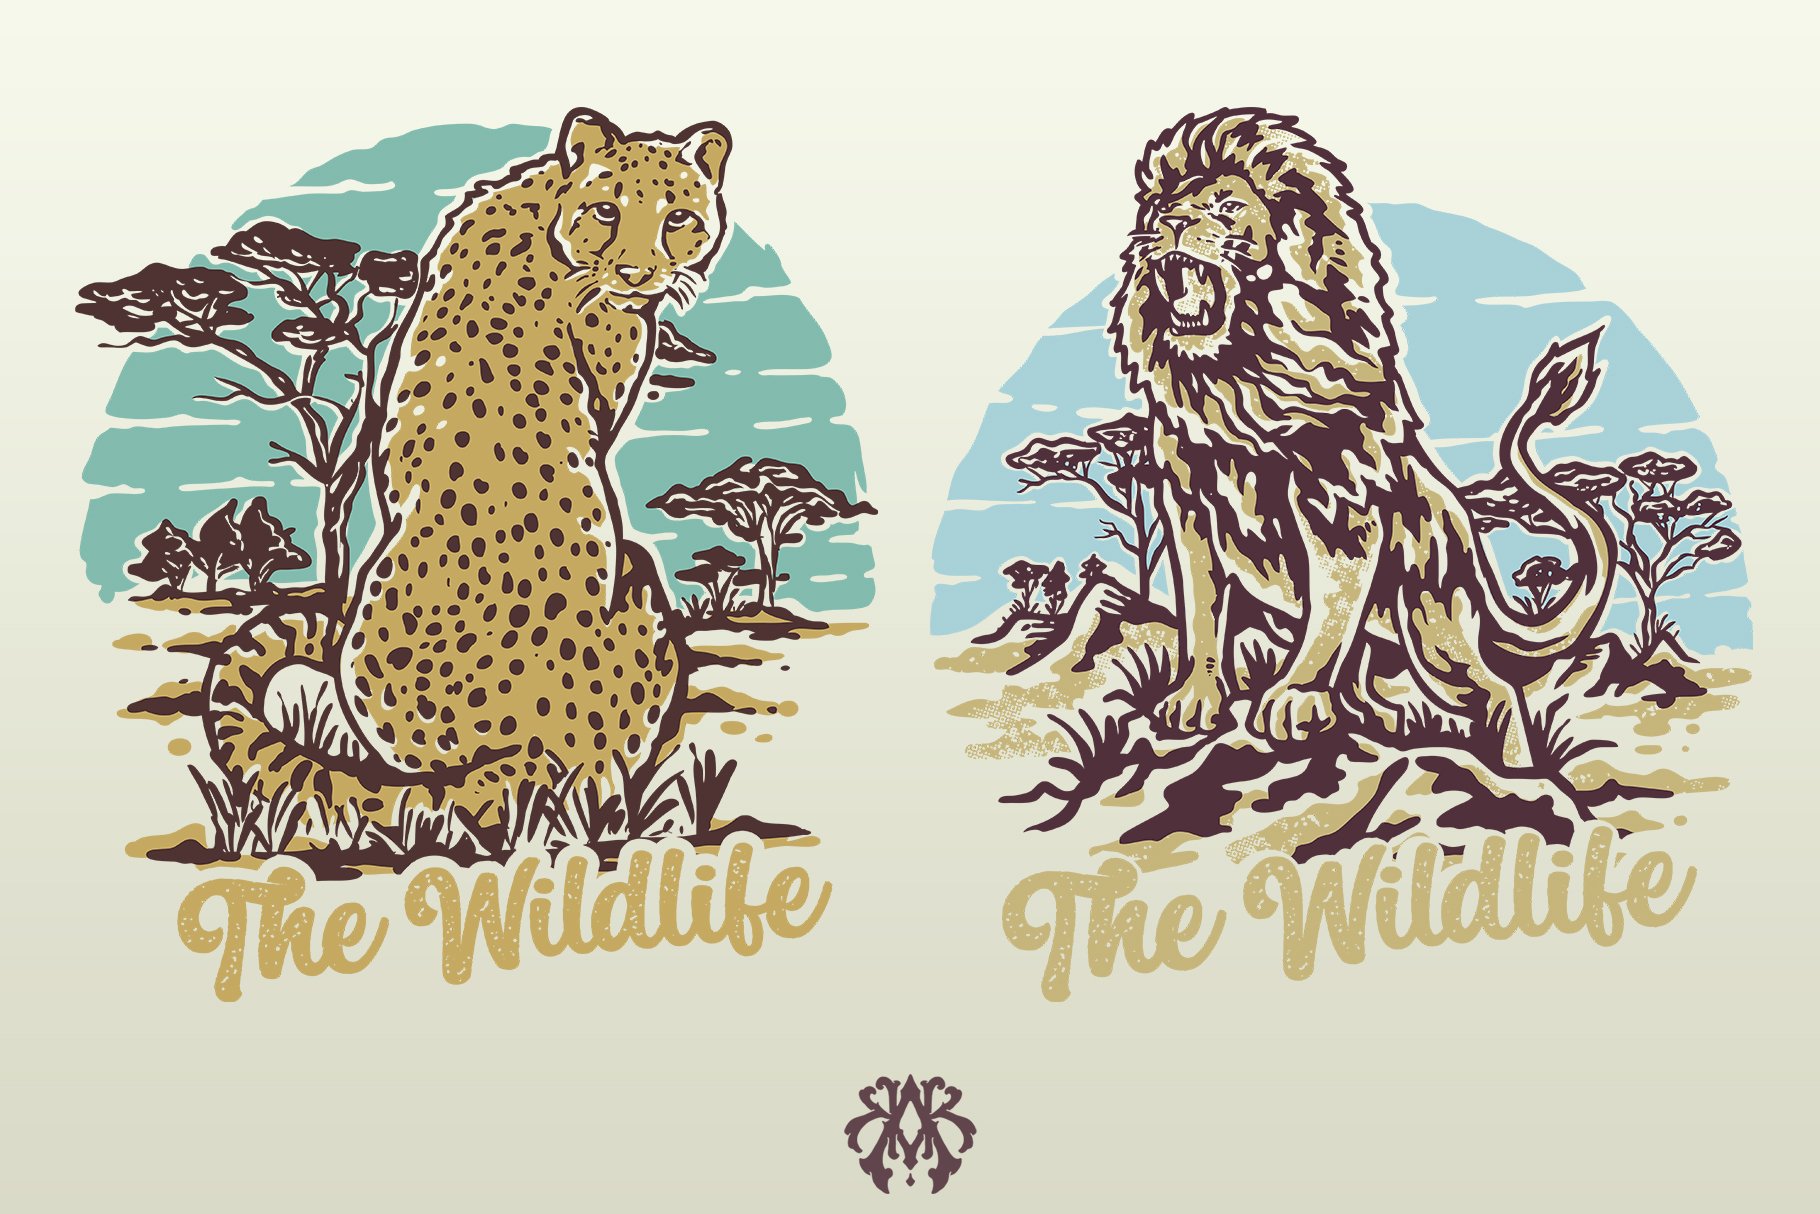 The Wildlife Cheetah & Lion cover image.